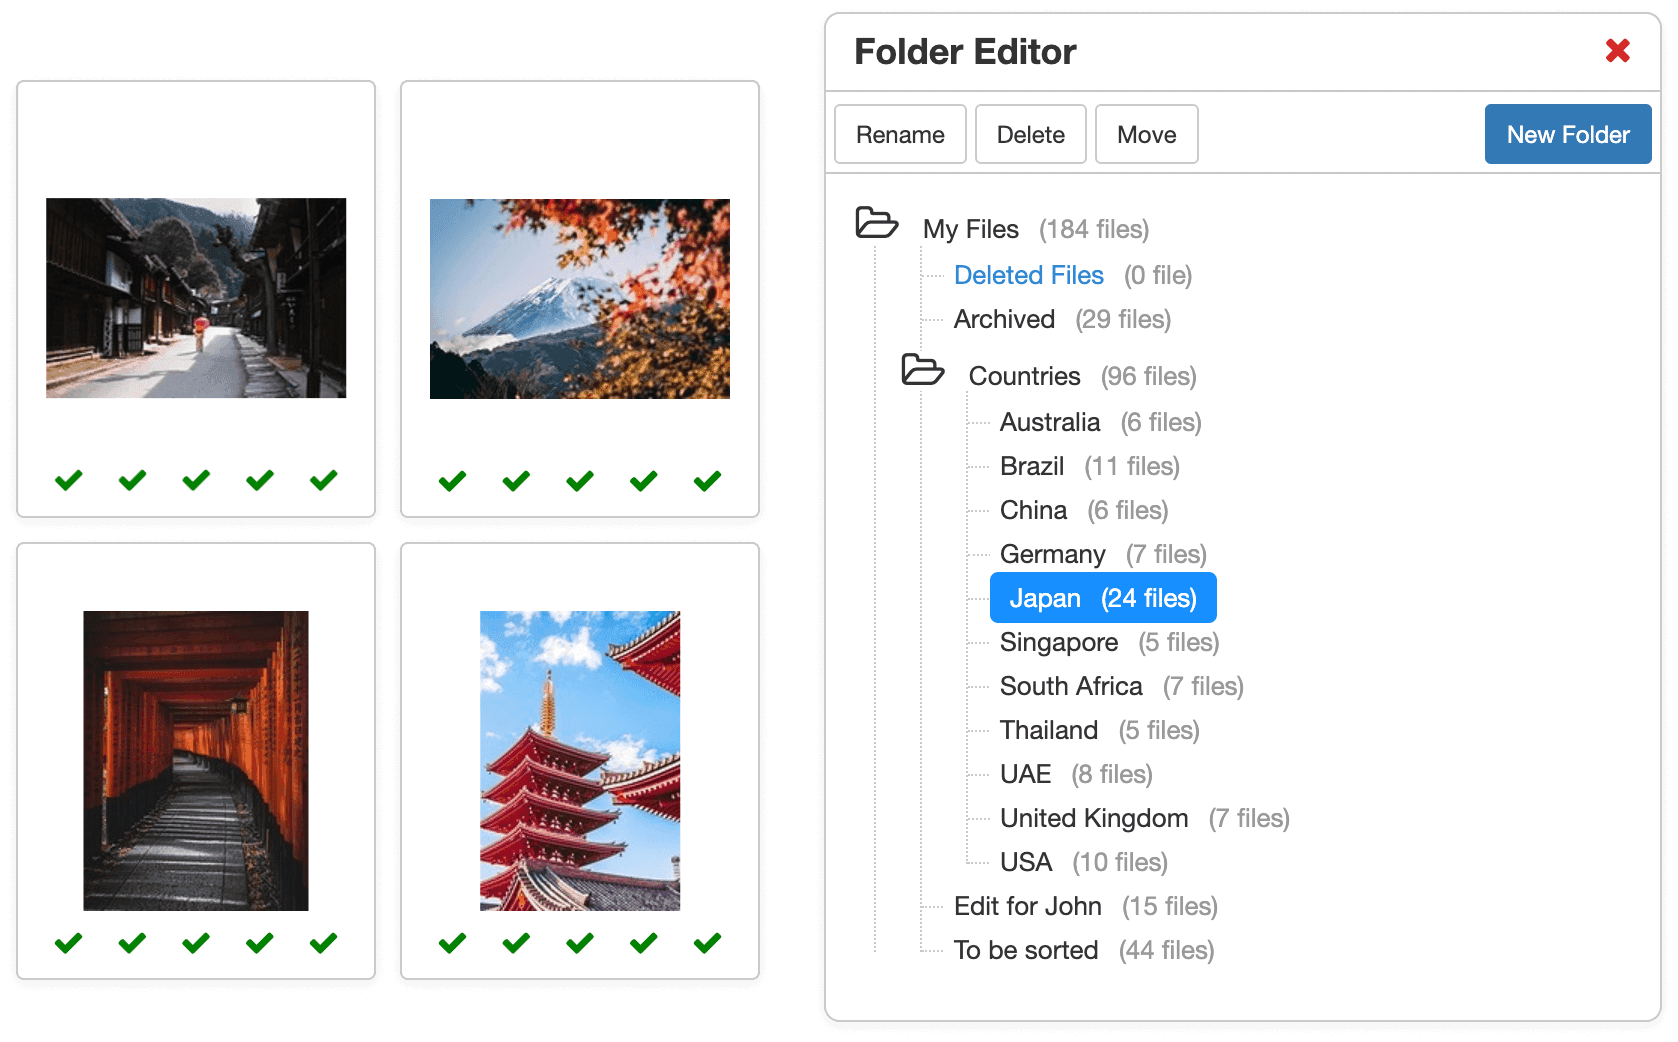 Organise with folders